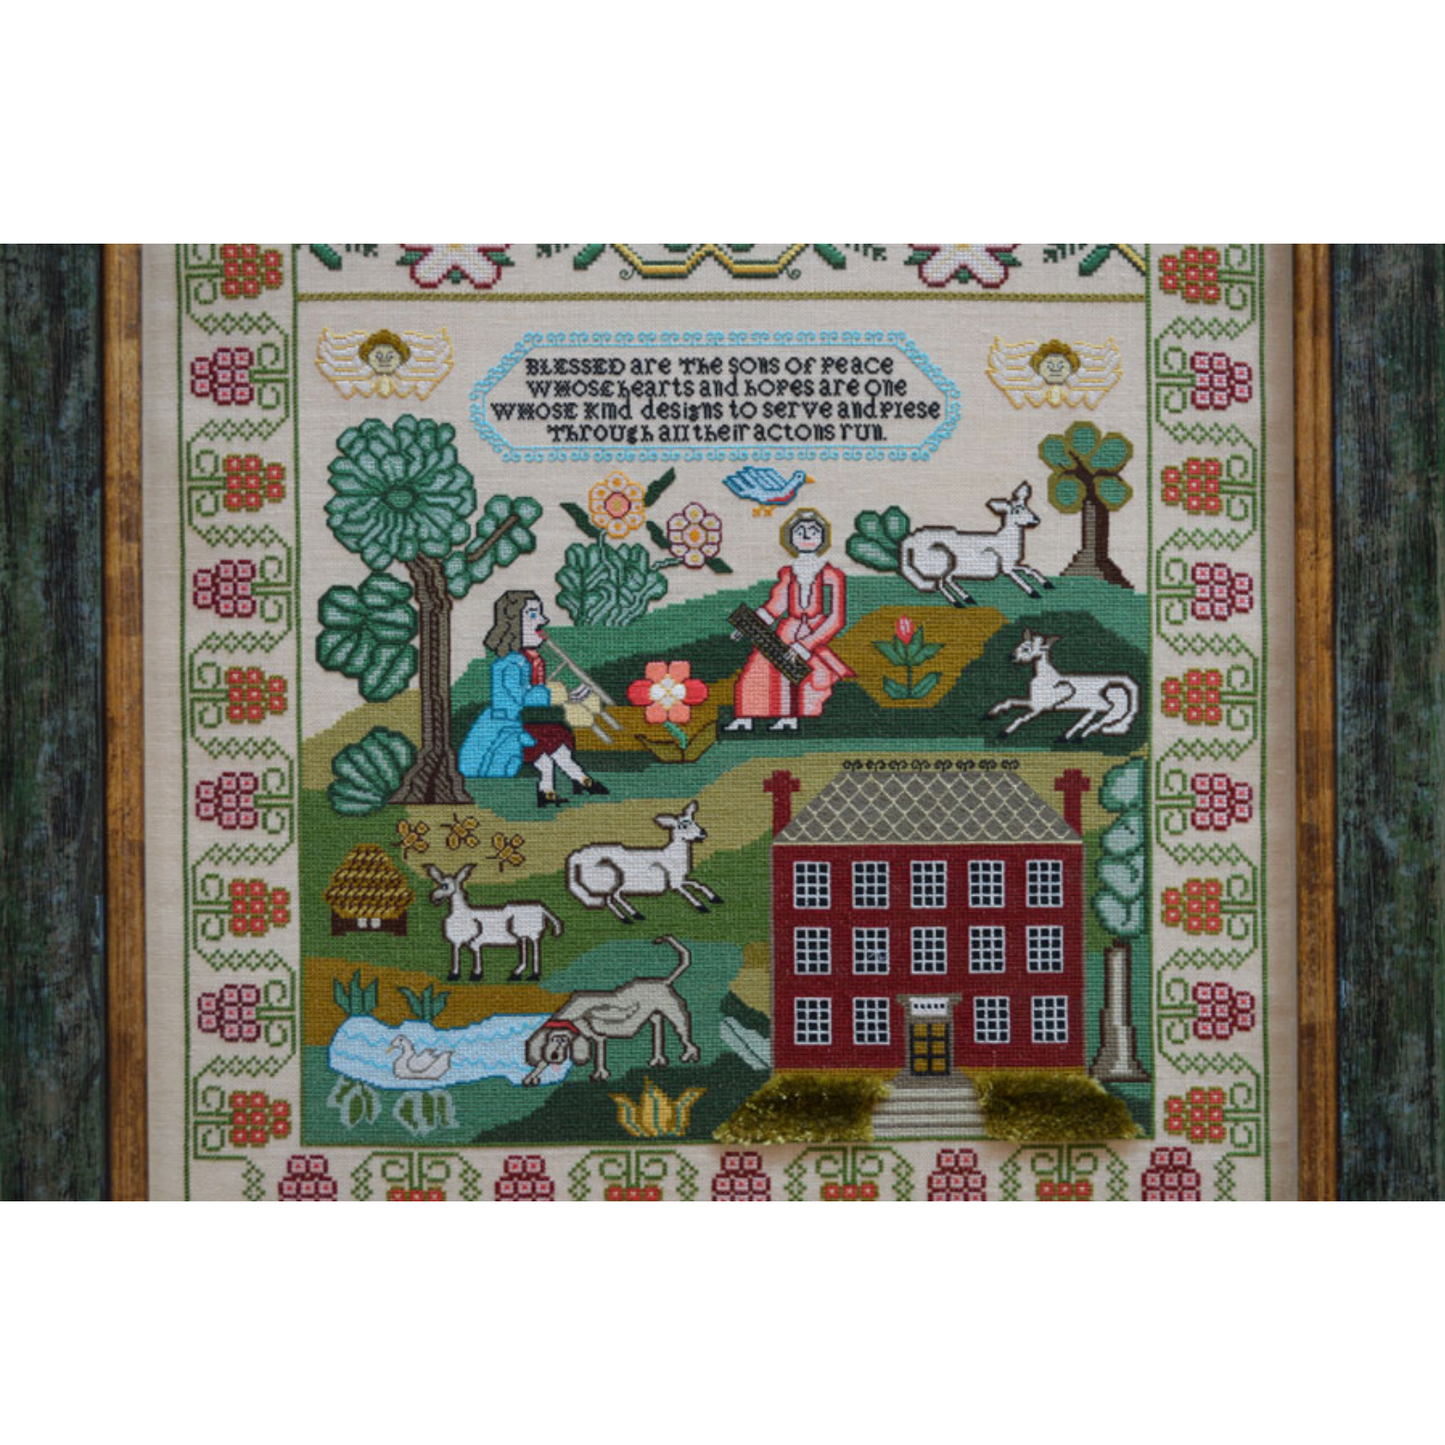 The Scarlet Letter ~ Blessed are the Sons of Peace Reproduction Sampler Pattern